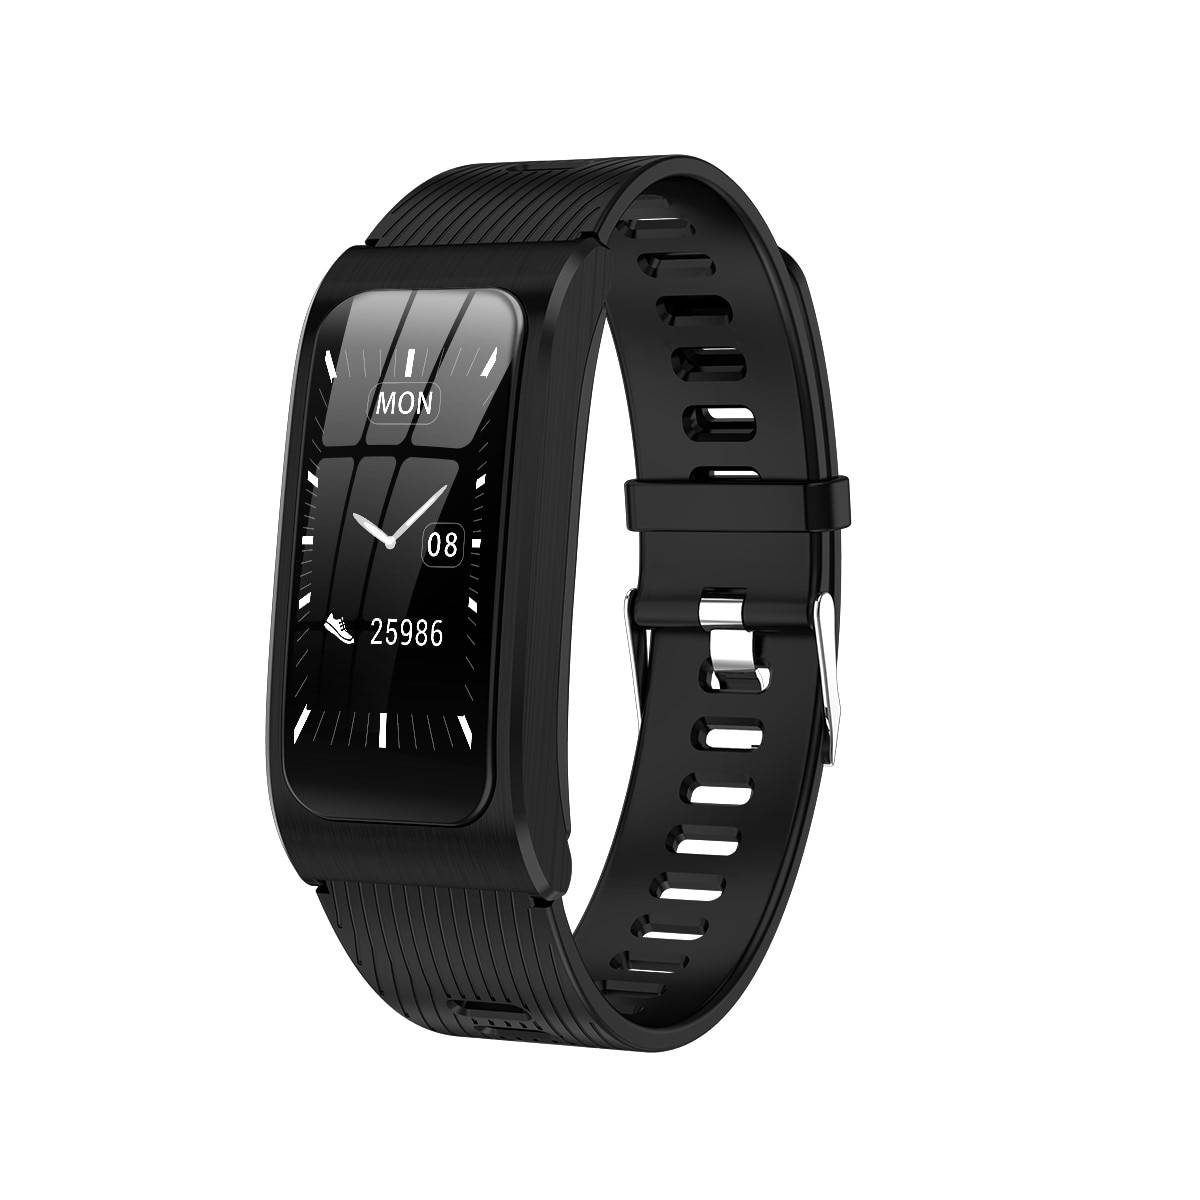 Women's Smart Watch with Heart Rate Monitor